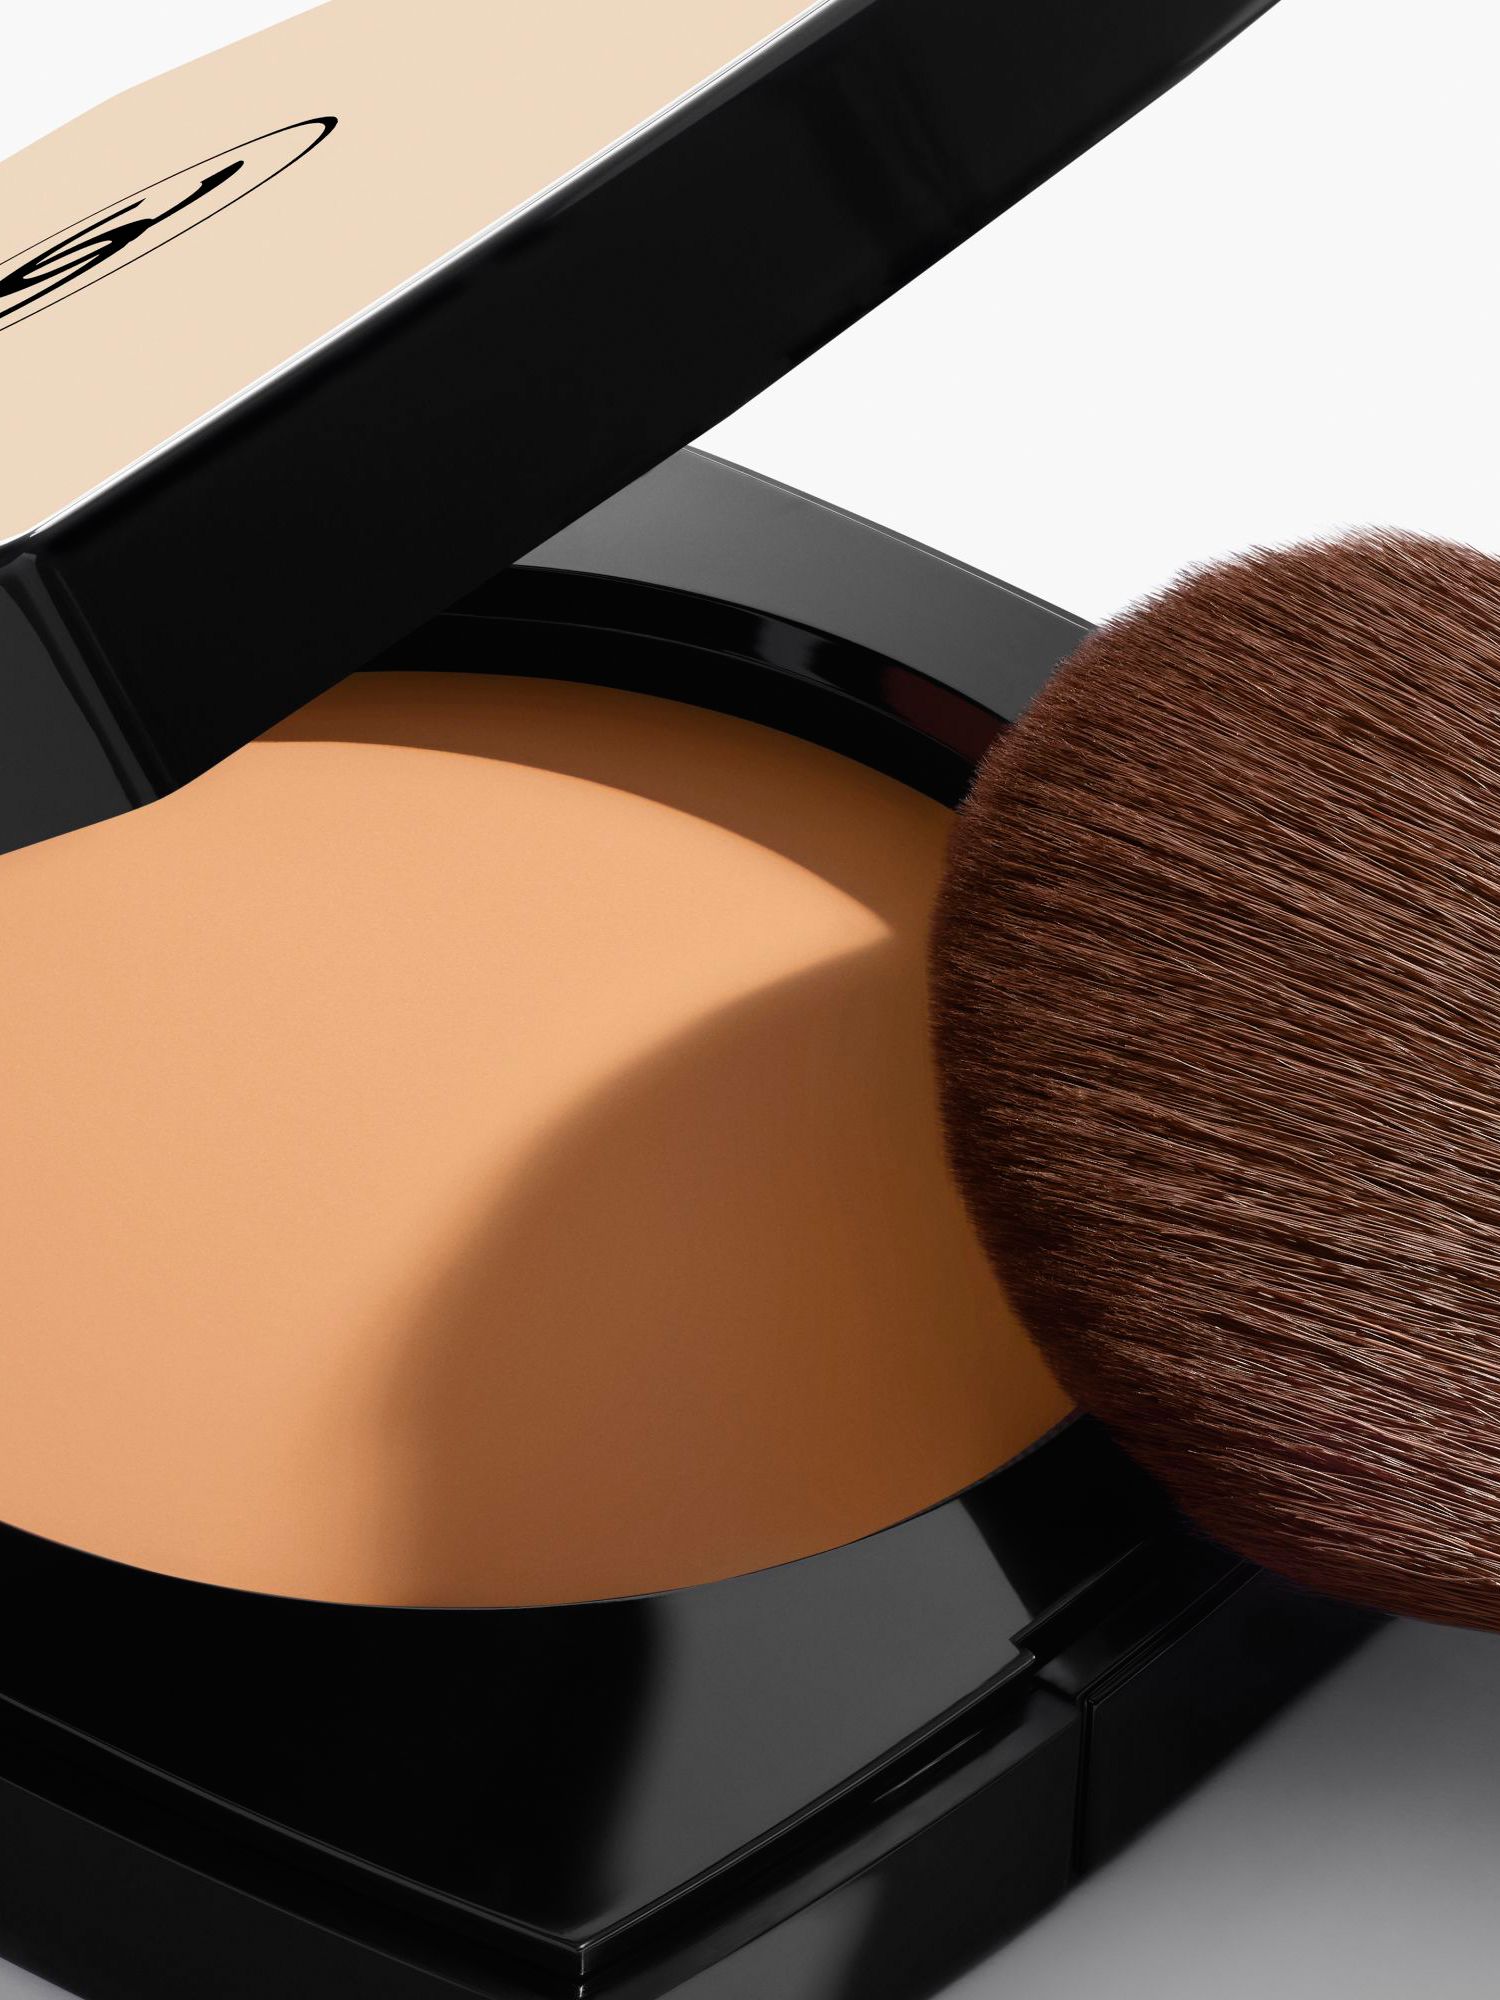 CHANEL Les Beiges Healthy Glow Powder, B40 at John Lewis & Partners